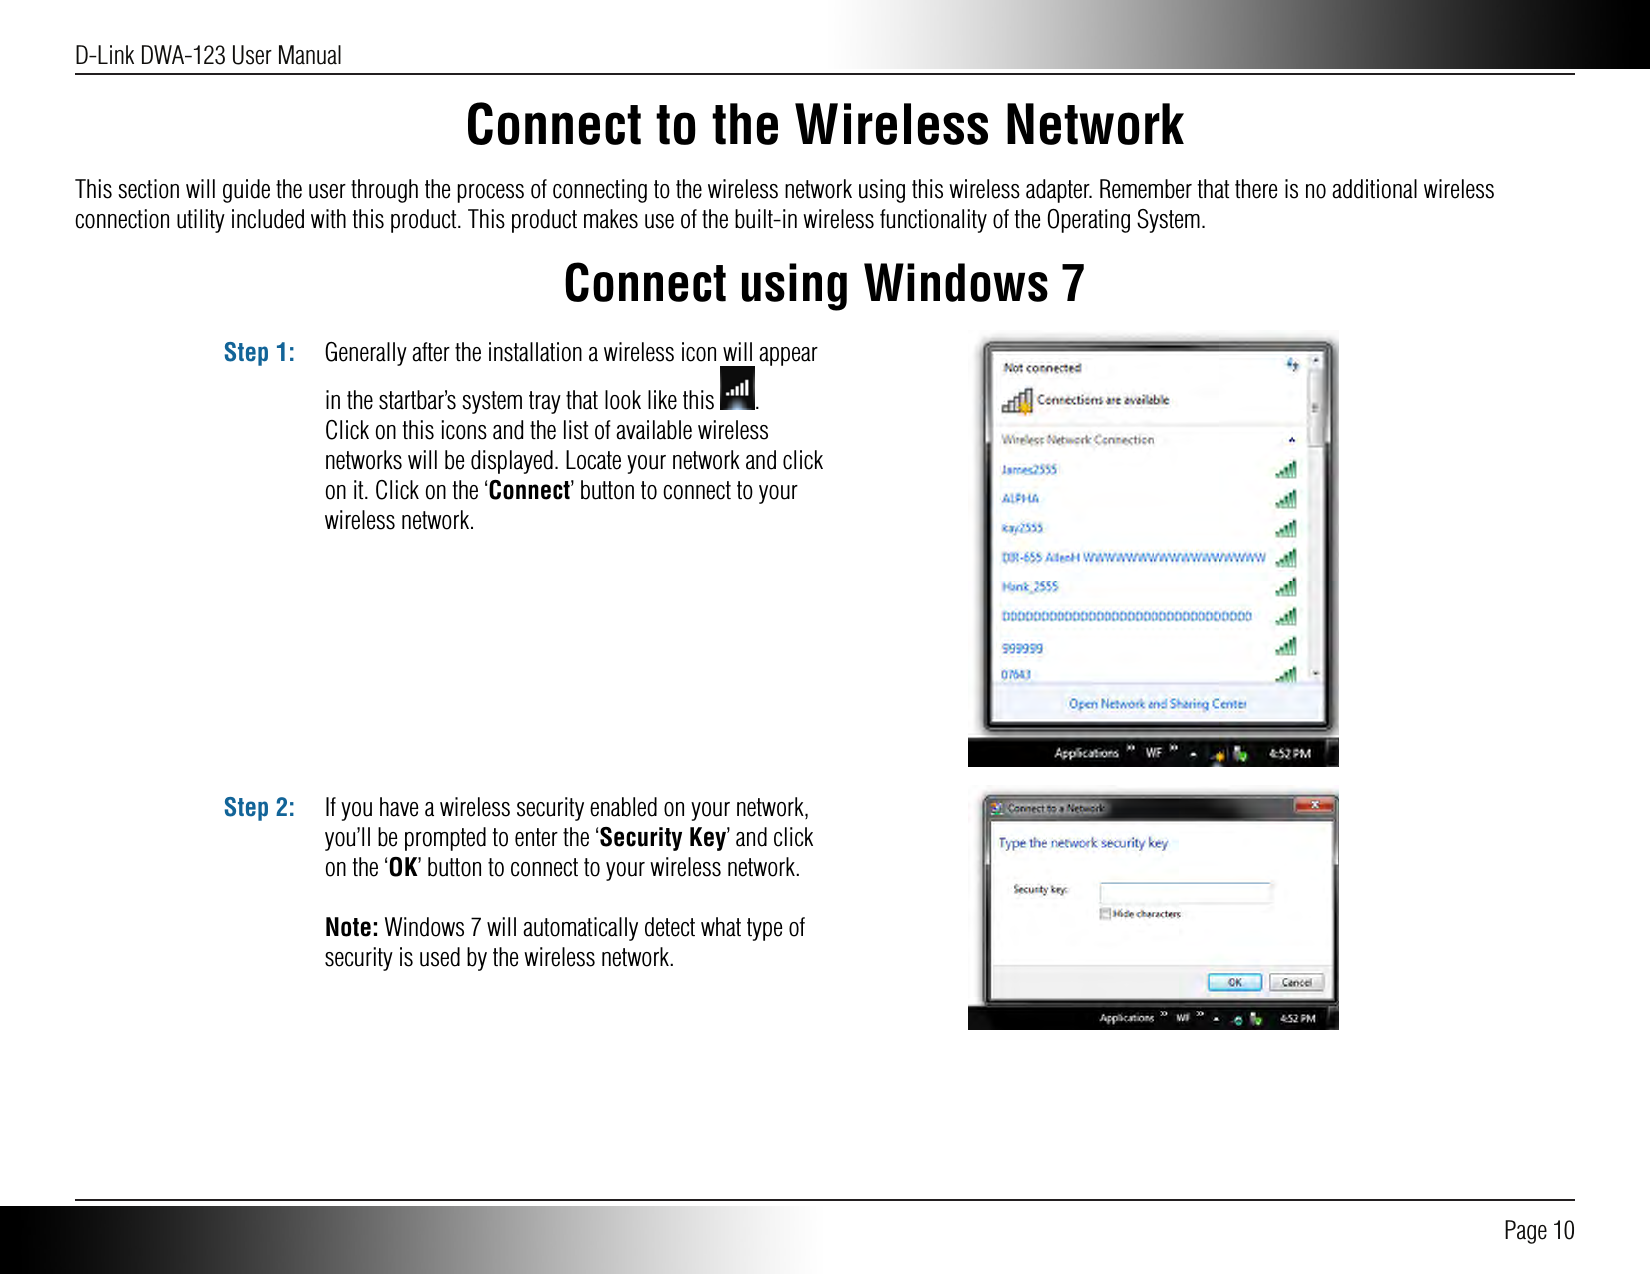 D-Link DWA-123 User Manual Page 10Connect to the Wireless NetworkThis section will guide the user through the process of connecting to the wireless network using this wireless adapter. Remember that there is no additional wireless connection utility included with this product. This product makes use of the built-in wireless functionality of the Operating System.Connect using Windows 7Generally after the installation a wireless icon will appear in the startbar’s system tray that look like this  .Click on this icons and the list of available wireless networks will be displayed. Locate your network and click on it. Click on the ‘Connect’ button to connect to your wireless network.Step 1:If you have a wireless security enabled on your network, you’ll be prompted to enter the ‘Security Key’ and click on the ‘OK’ button to connect to your wireless network.Note: Windows 7 will automatically detect what type of security is used by the wireless network. Step 2: